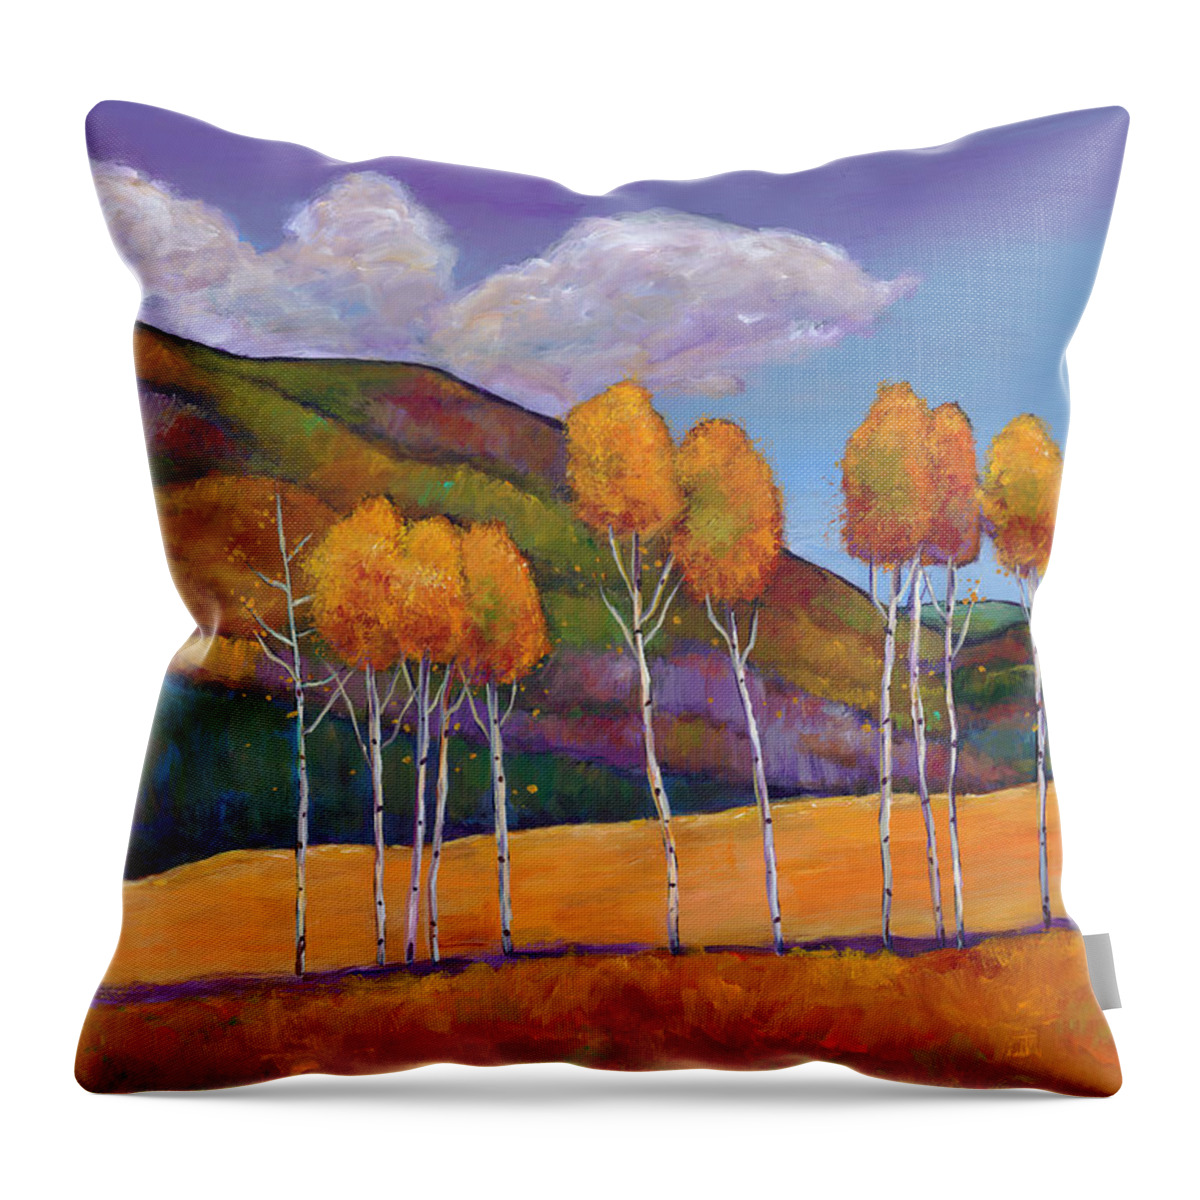 Autumn Aspen Throw Pillow featuring the painting Reminiscing by Johnathan Harris